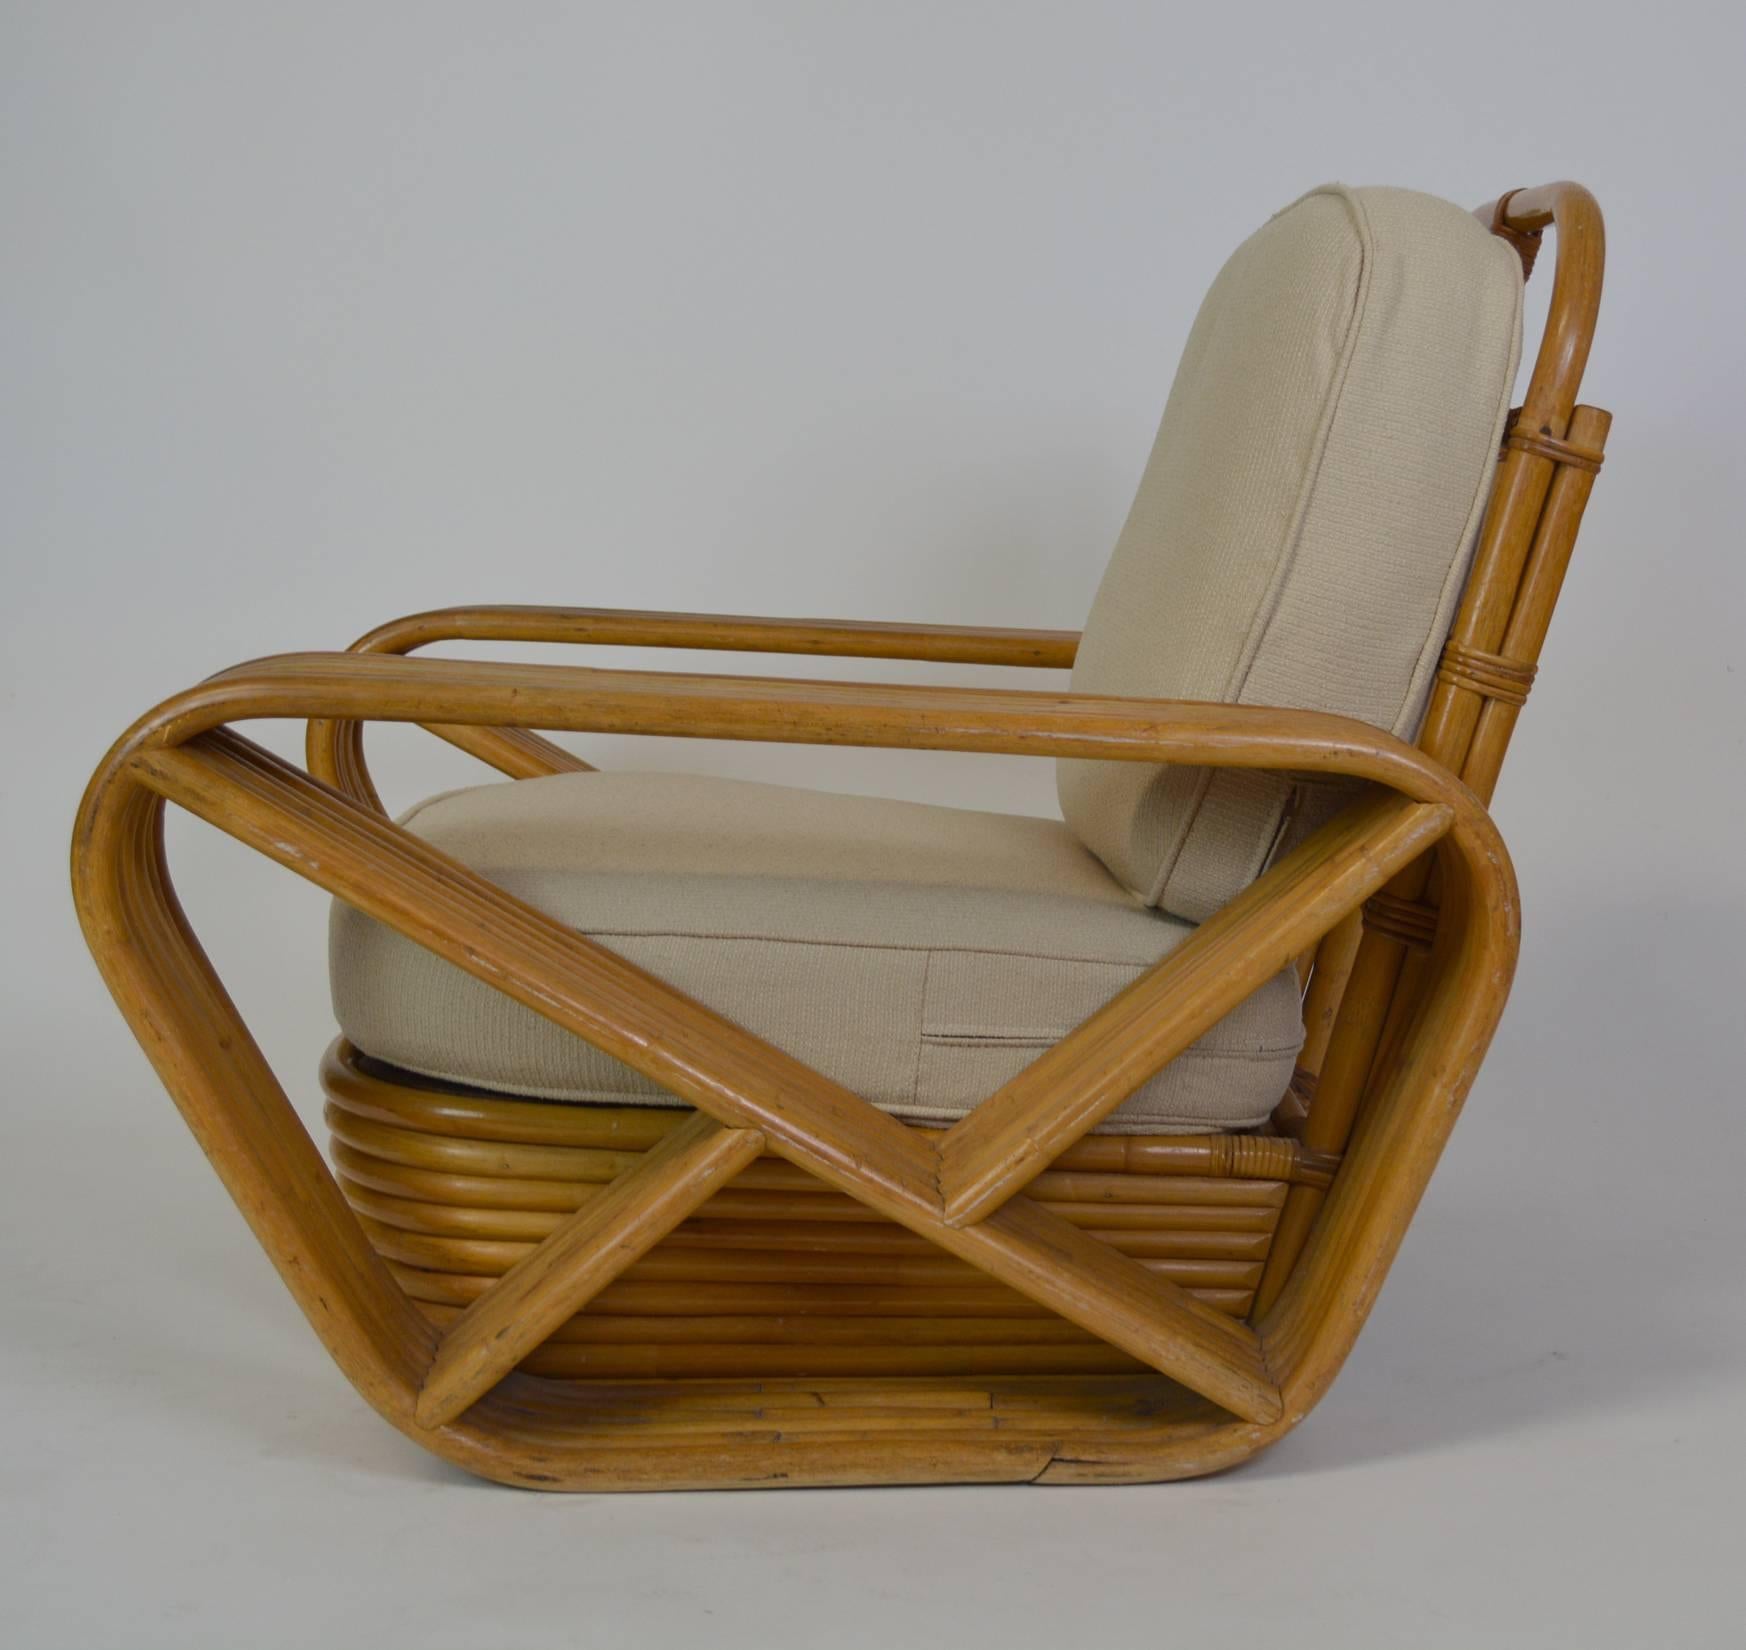 A pair of Art Deco Paul Frankl style rattan lounge chairs by Tochiku Industries, Japan. With new cushions and upholstery. six strand rattan arms. Ottoman available separately.